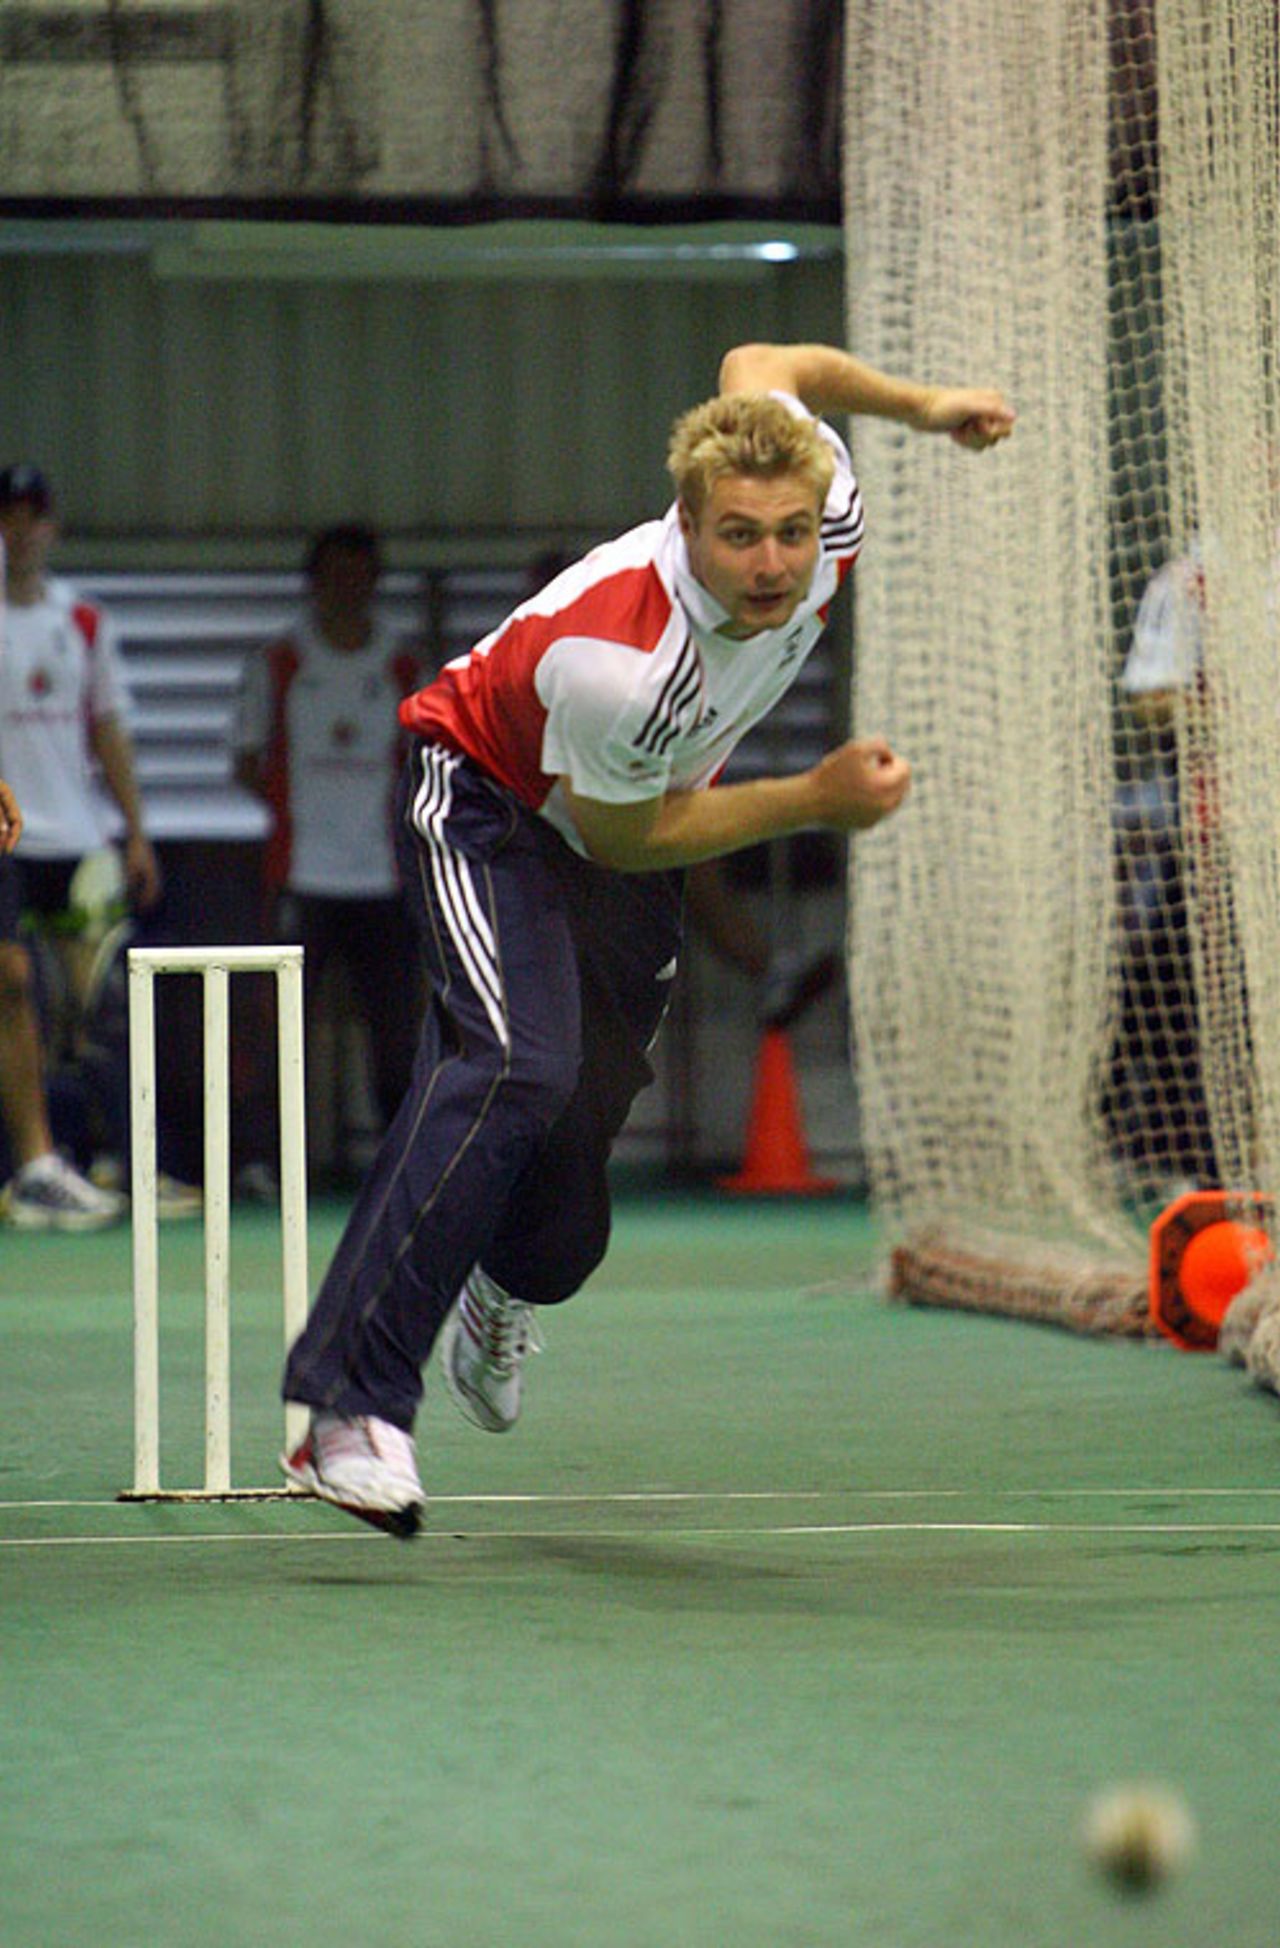 Luke Wright bowls in the indoor nets ahead of the fifth and final ODI against South Africa, Durban, December 3, 2009